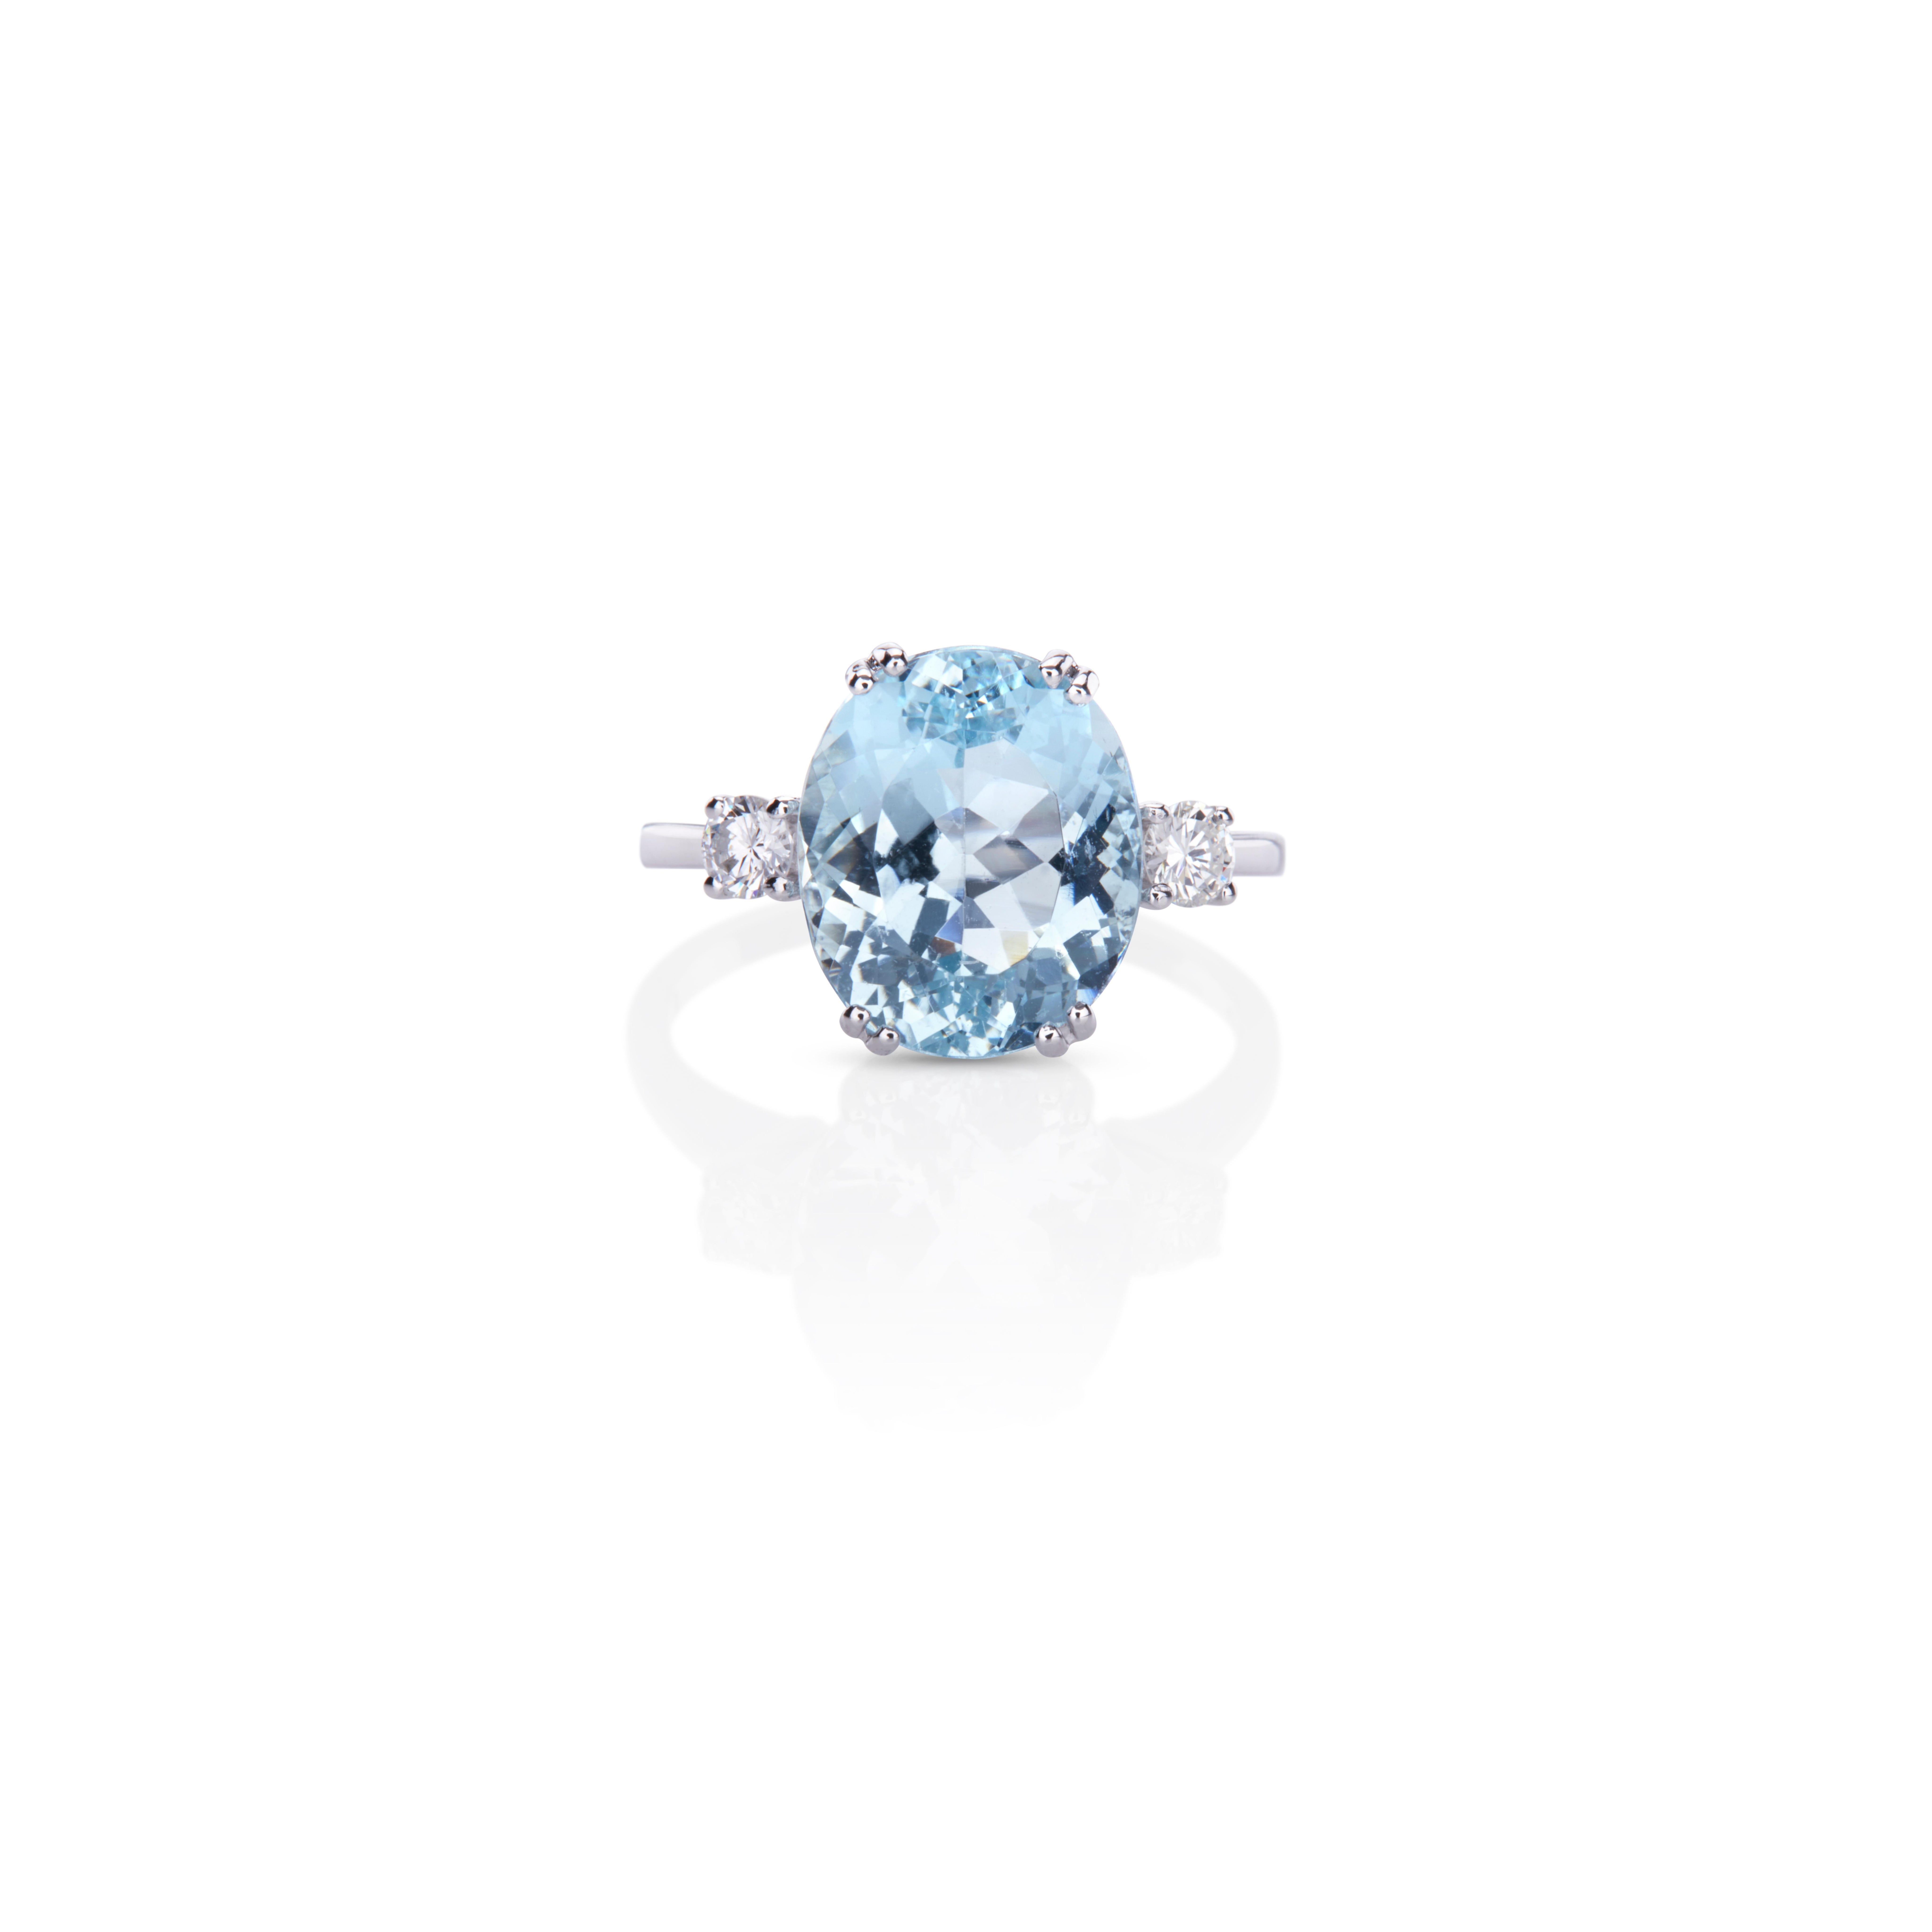 Unique statement ring made of 18Kt white gold with rare oval shaped aquamarine, sea blue colour, and two brilliant cut diamonds. Taking inspiration from the blue waters of his home island, Nicofilimon crafted an amazing One-Of-A-Kind ring, that adds